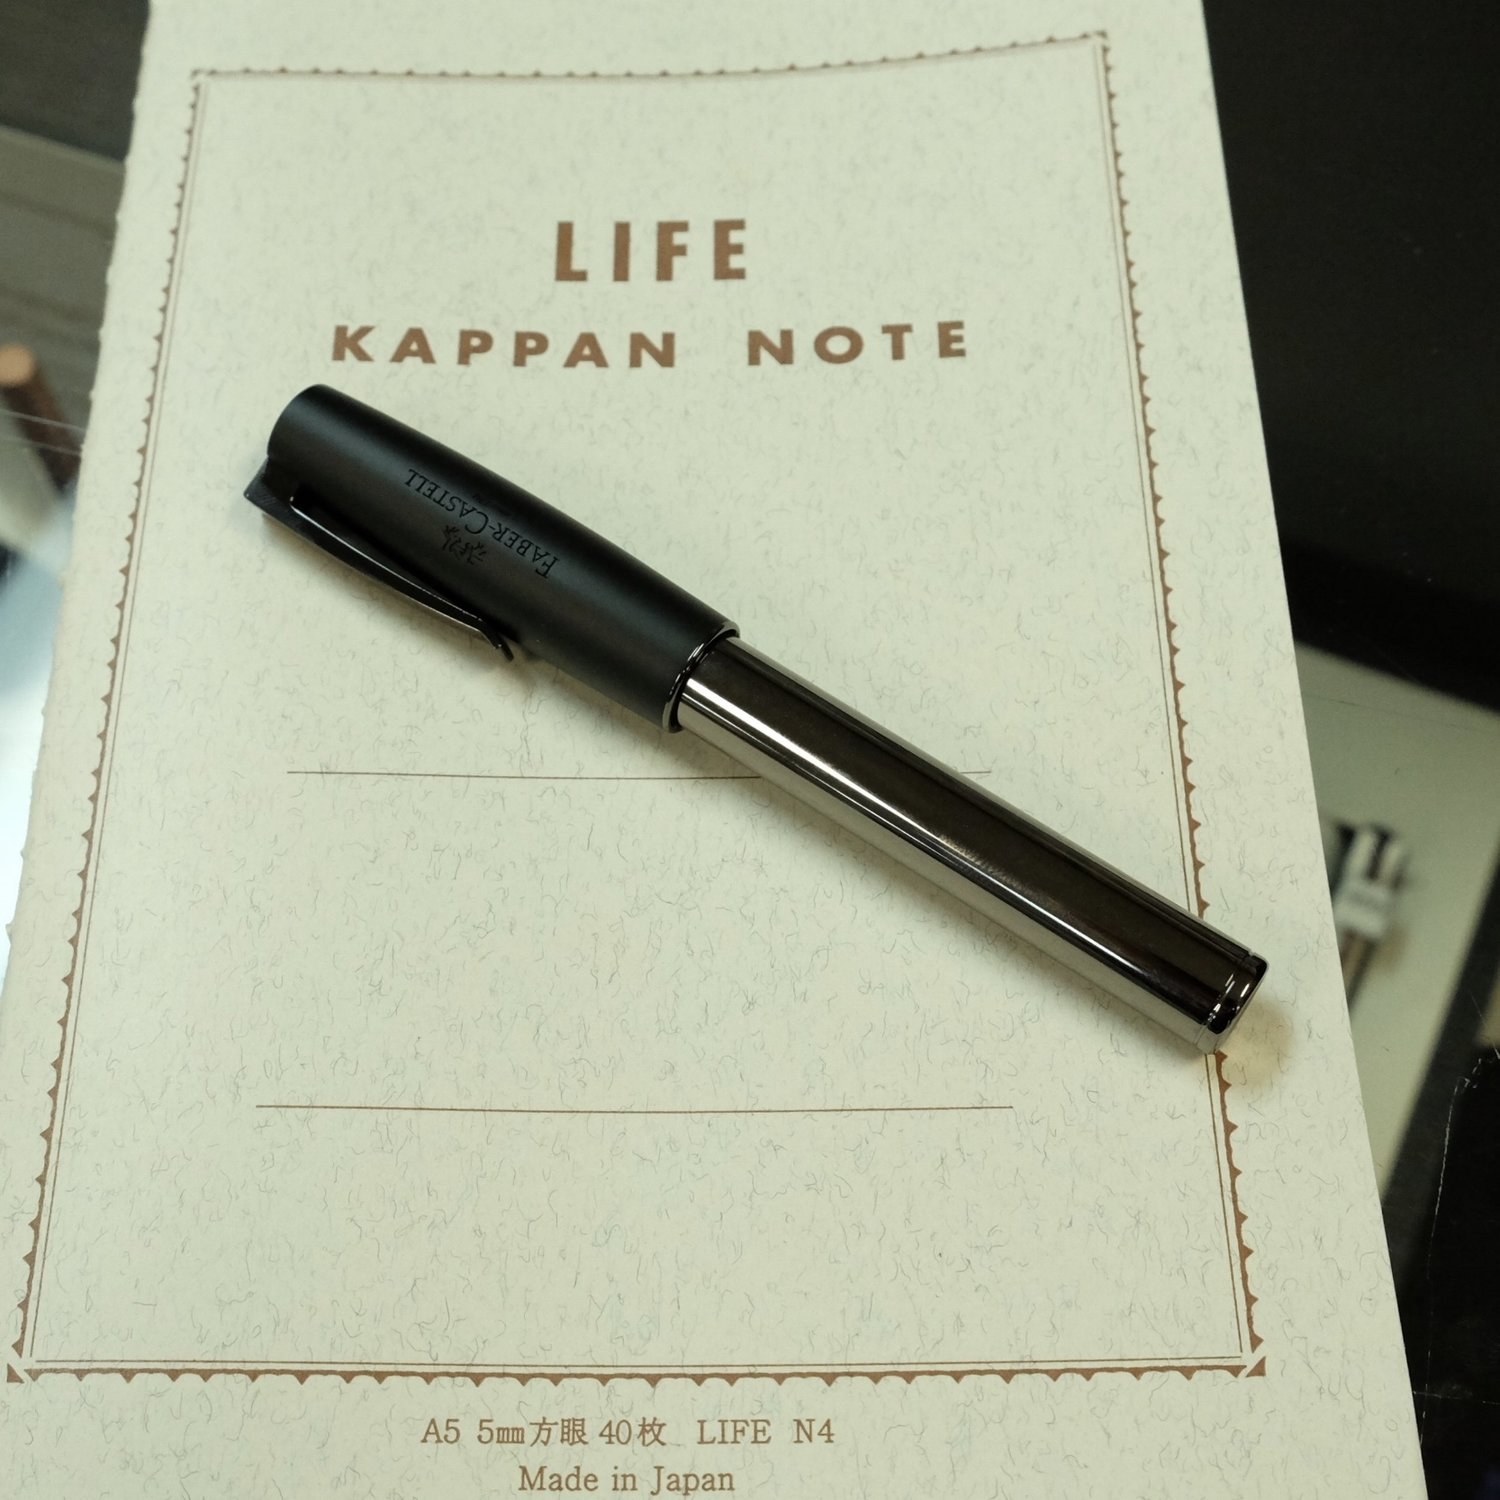 FABER-CASTELL LOOM FOUNTAIN PEN REVIEW, The Pencilcase Blog